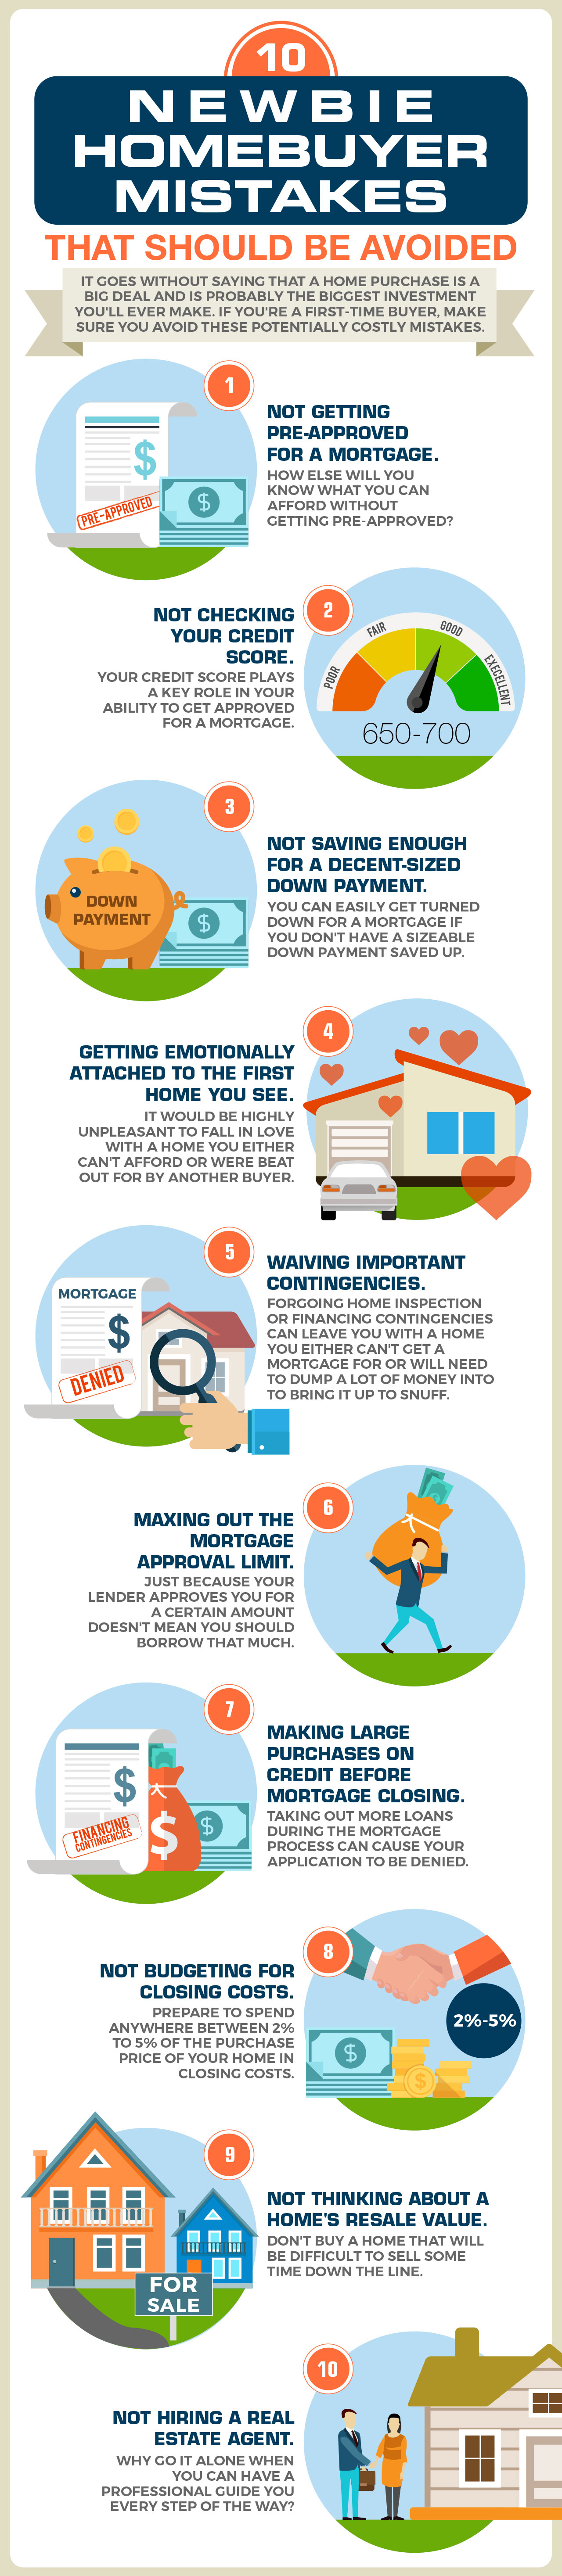 10-newbie-homebuyer-mistakes-that-should-be-avoided-infographic